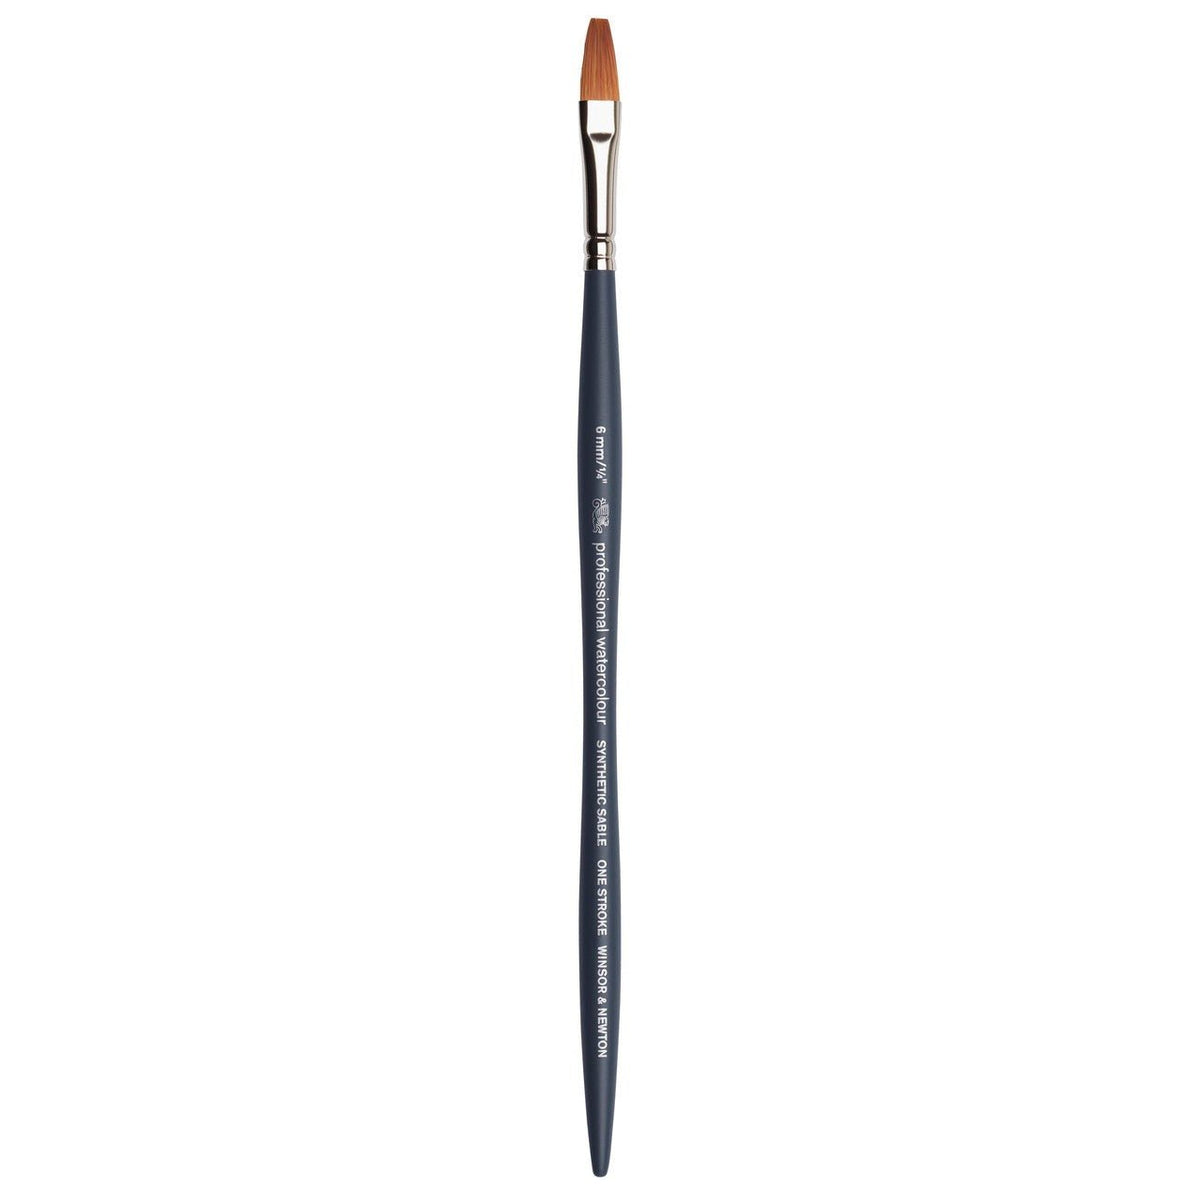 Winsor & Newton Professional Watercolor Synthetic Sable Brush - Rigger,  Size 6, Short Handle